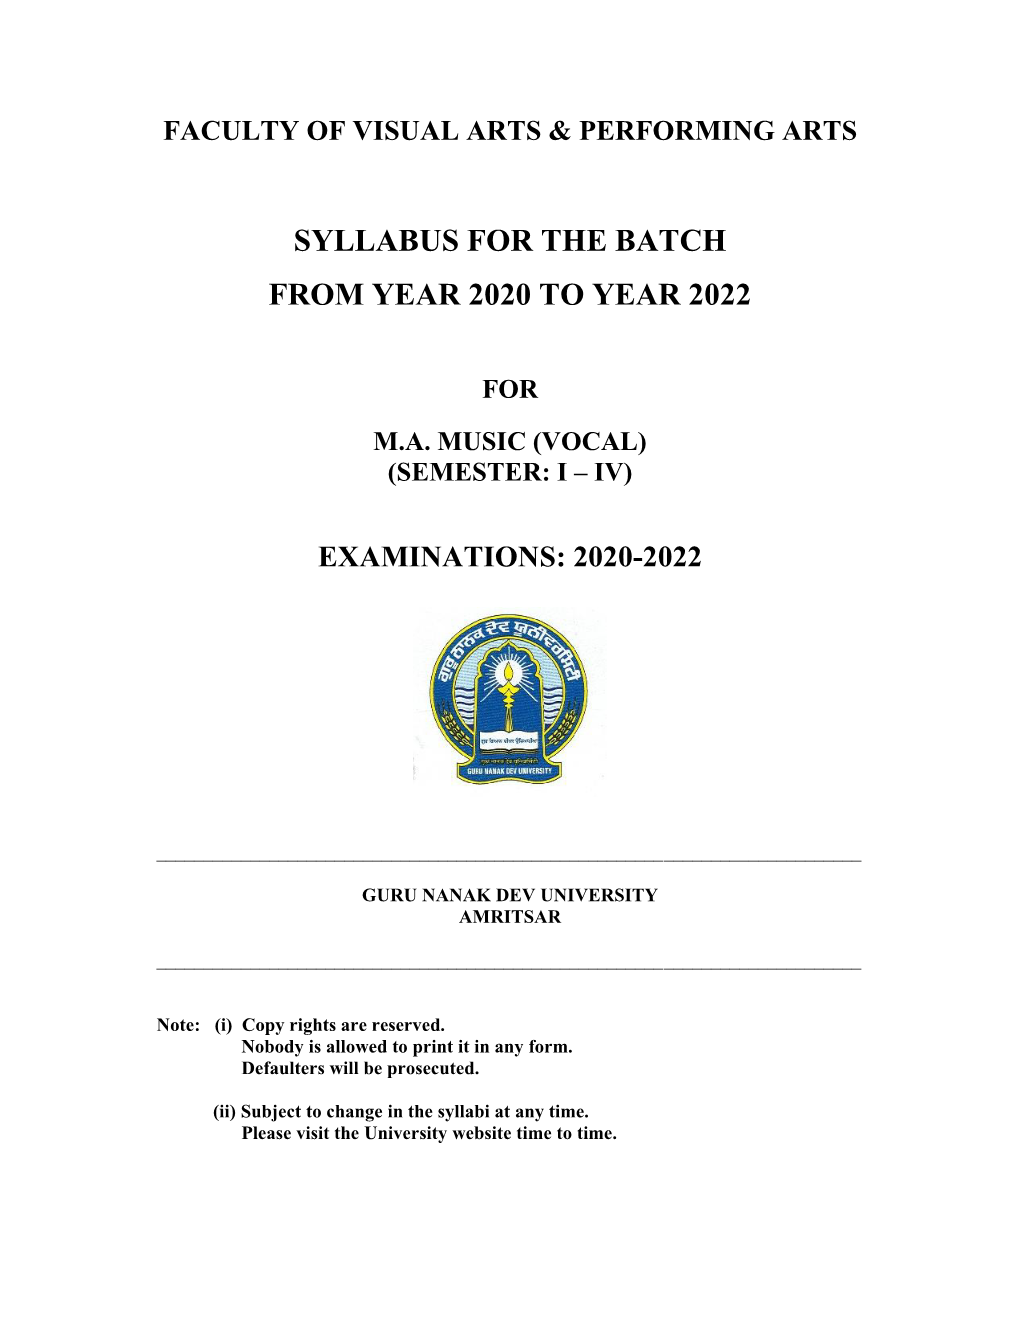 Syllabus for the Batch from Year 2020 to Year 2022